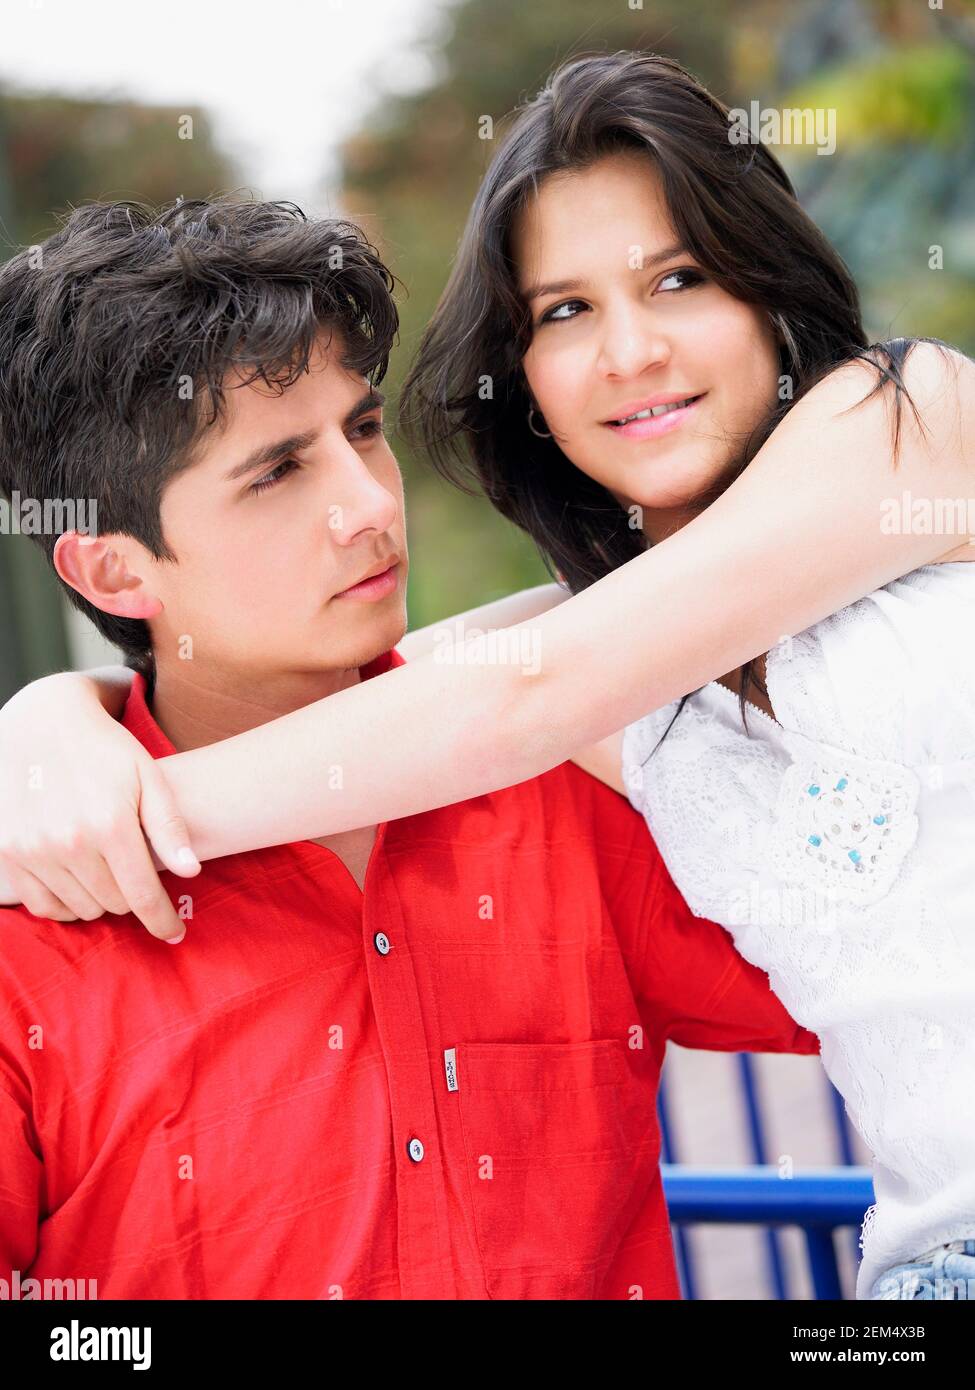 Close-up of a teenage girl with her arm around a young man Stock Photo